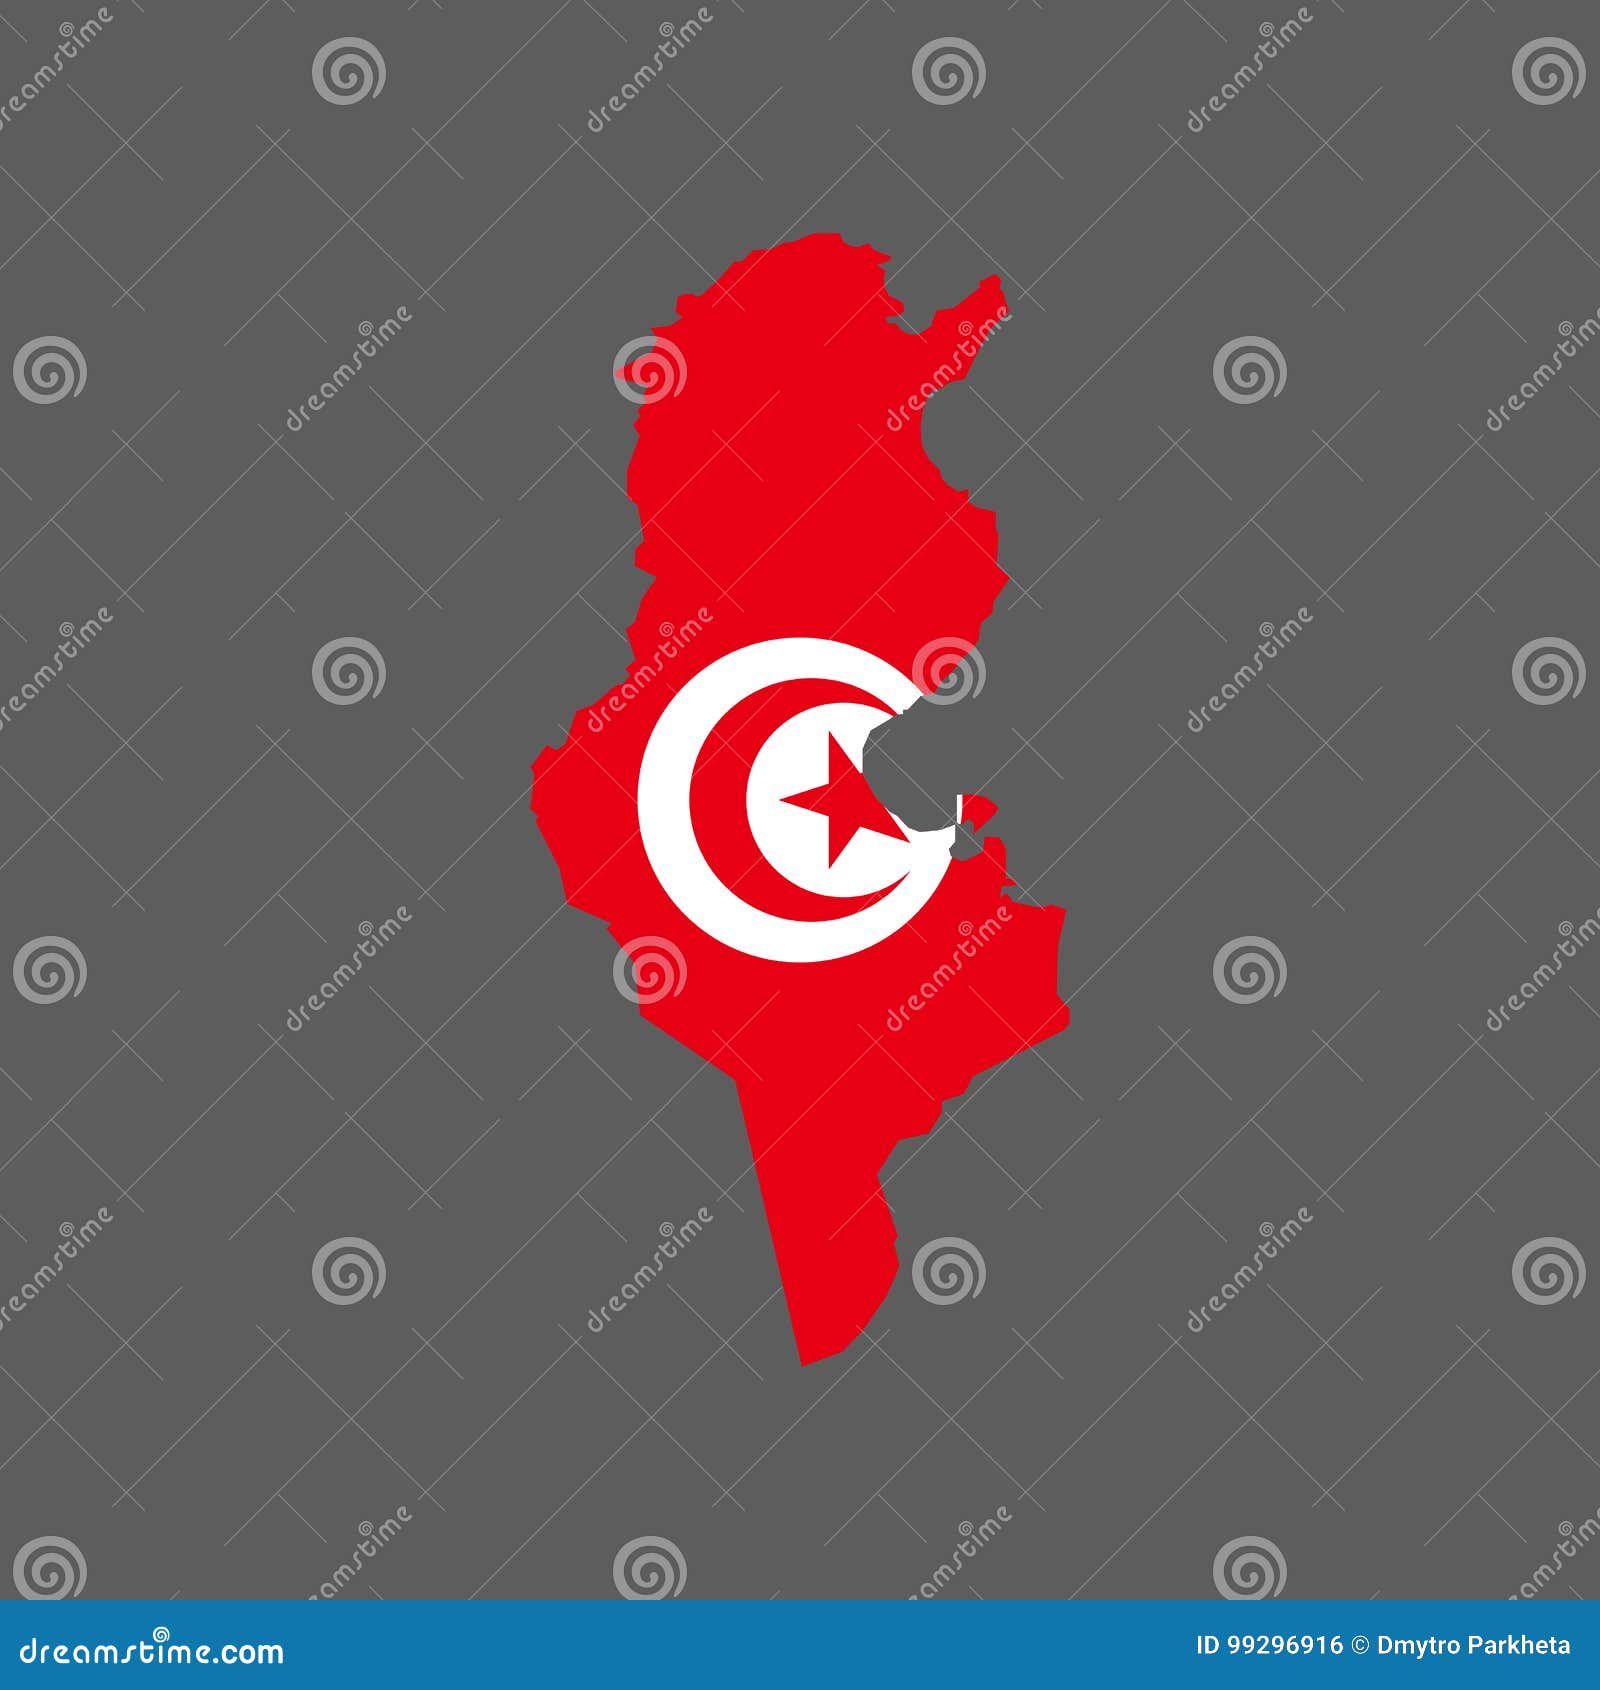 Tunisia map and flag stock vector. Illustration of shape ...